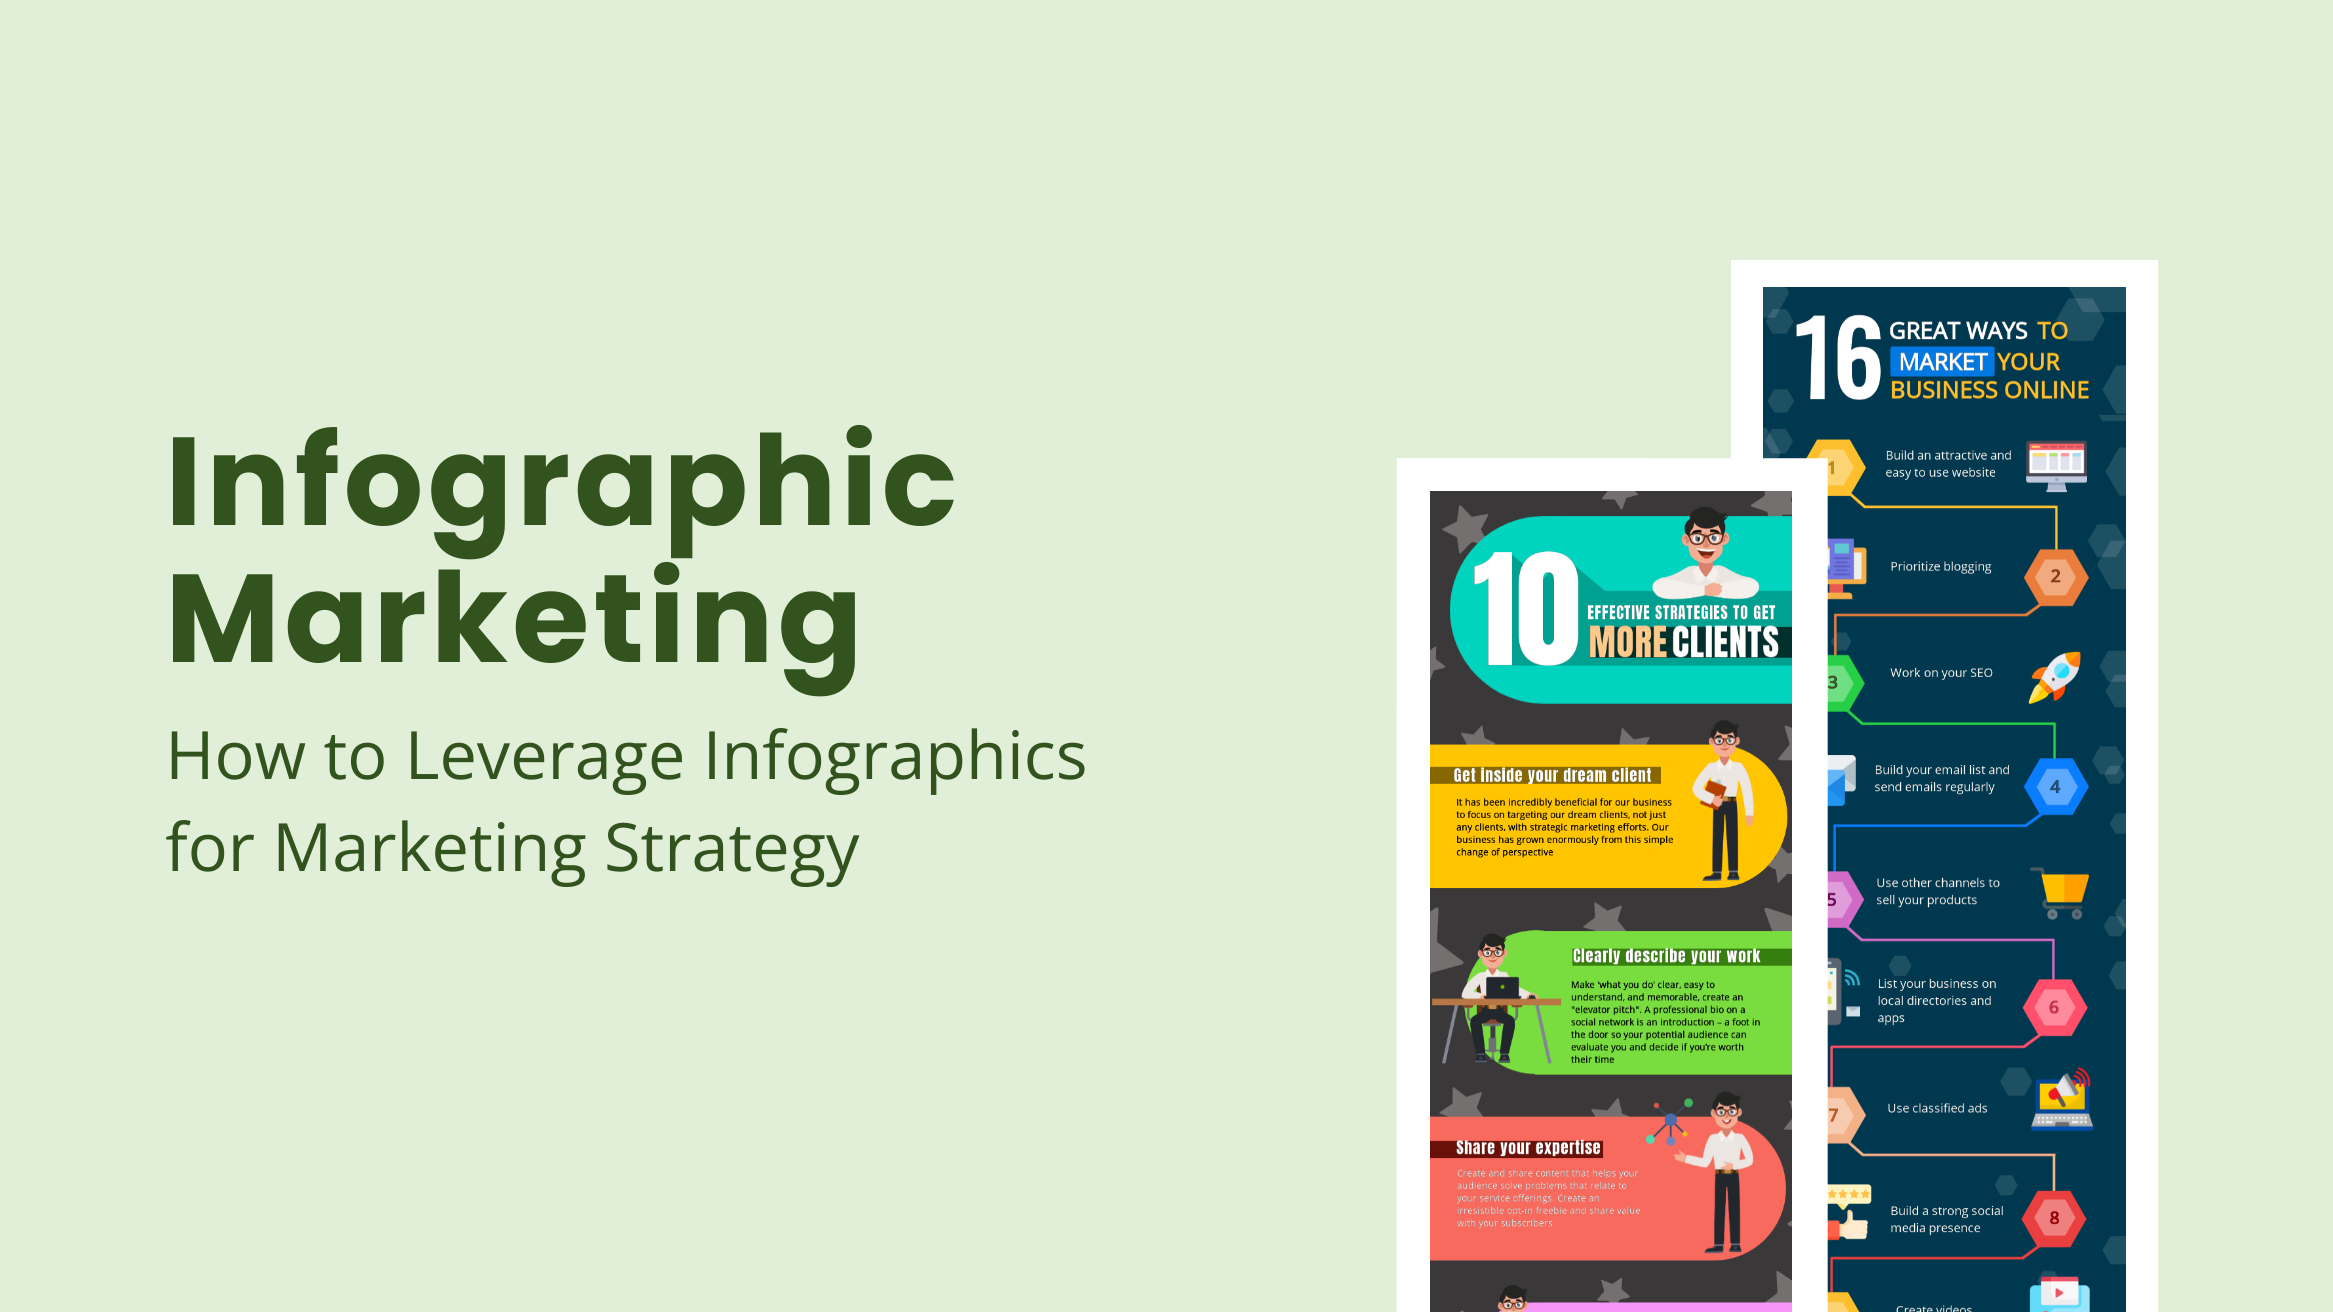 Infographic Marketing How to Leverage Infographics for Marketing Strategy